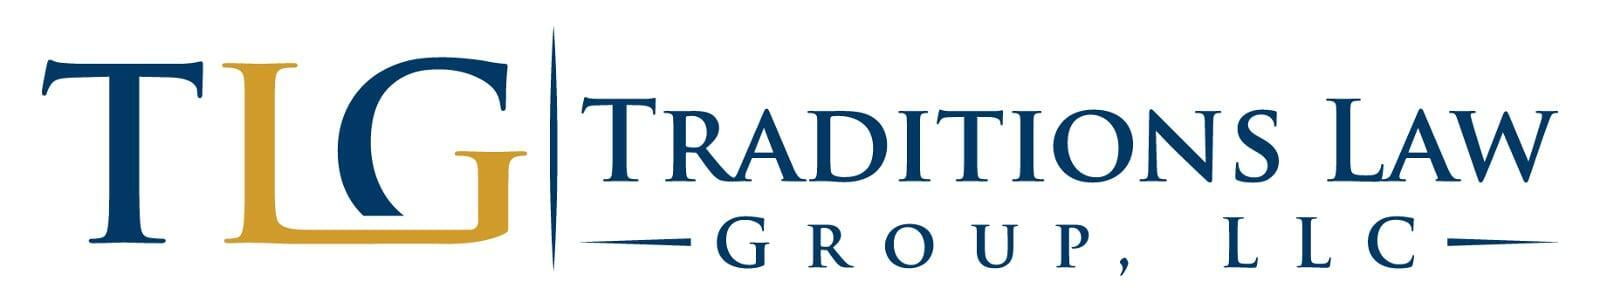 Traditions Law Group, LLC